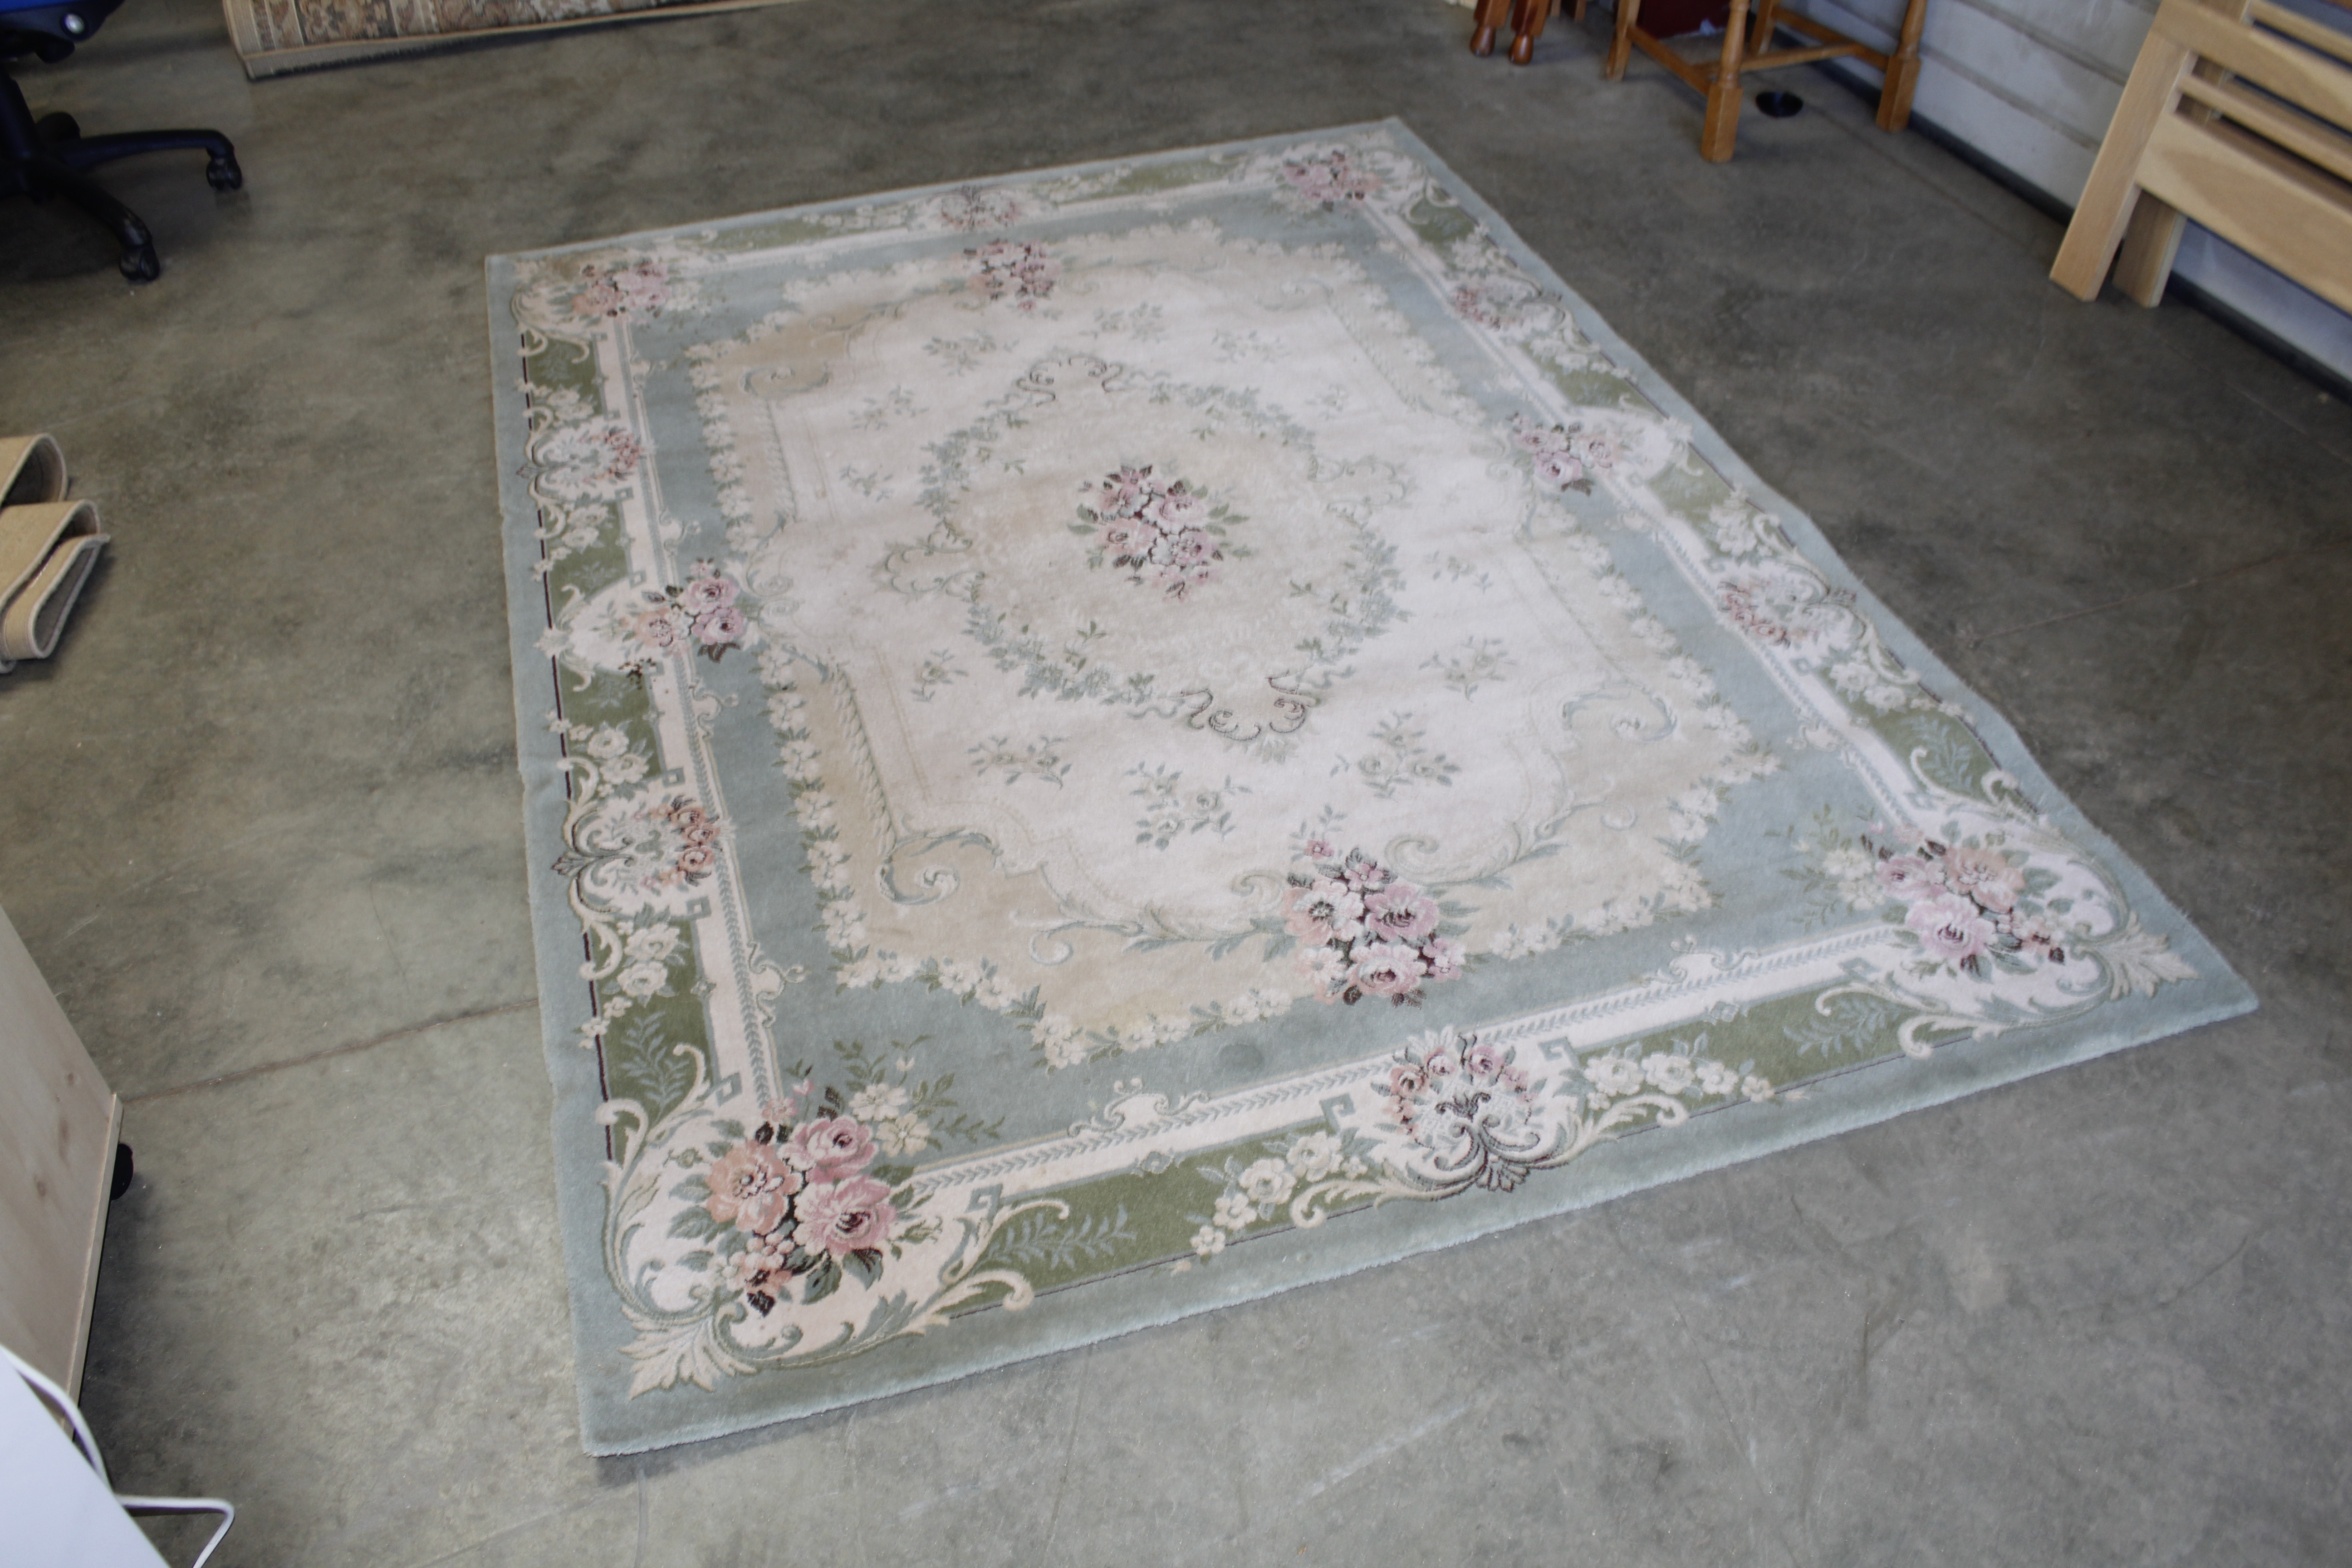 An approx. 7'11" x 5'8" green floral patterned rug